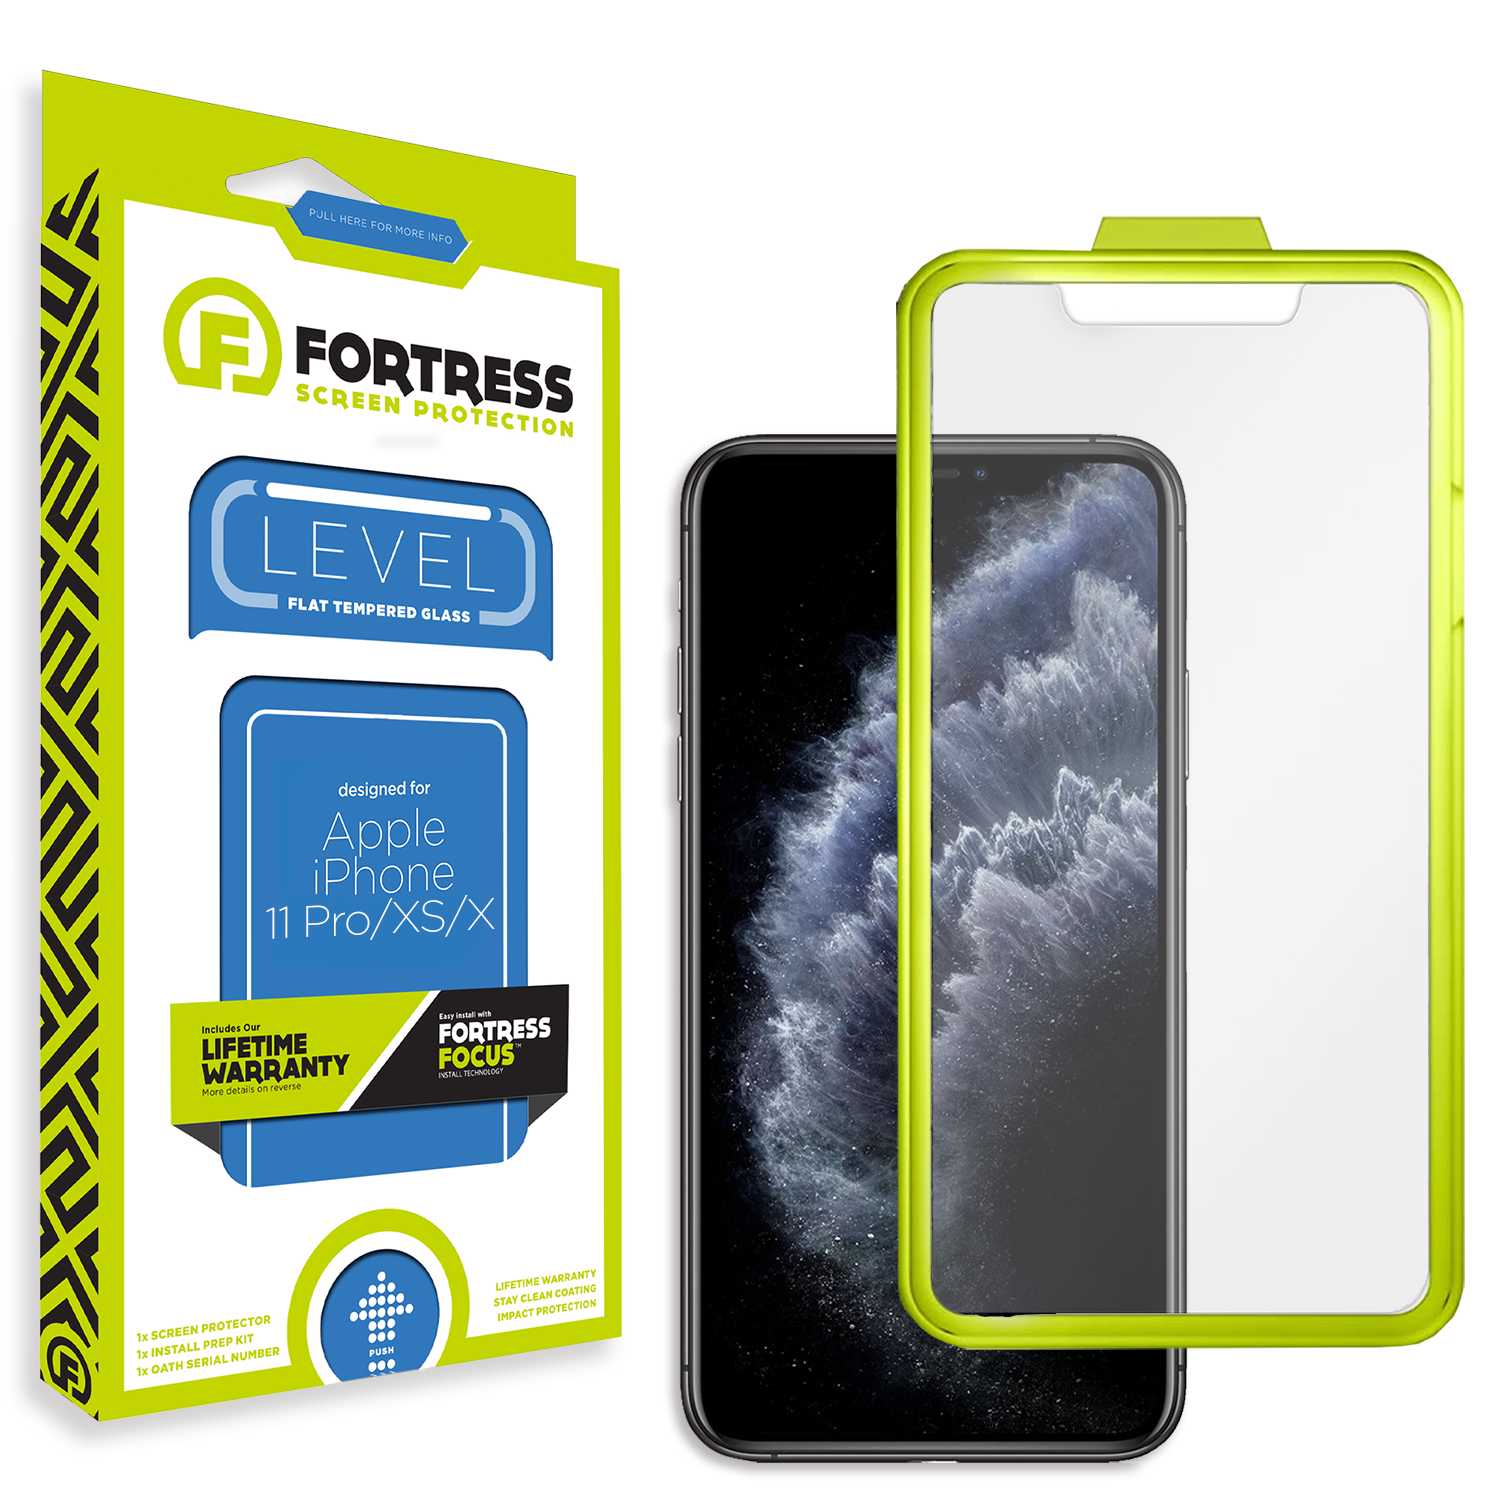 Fortress iPhone X Screen Protector $0CoverageInstallTool Scooch Screen Protector